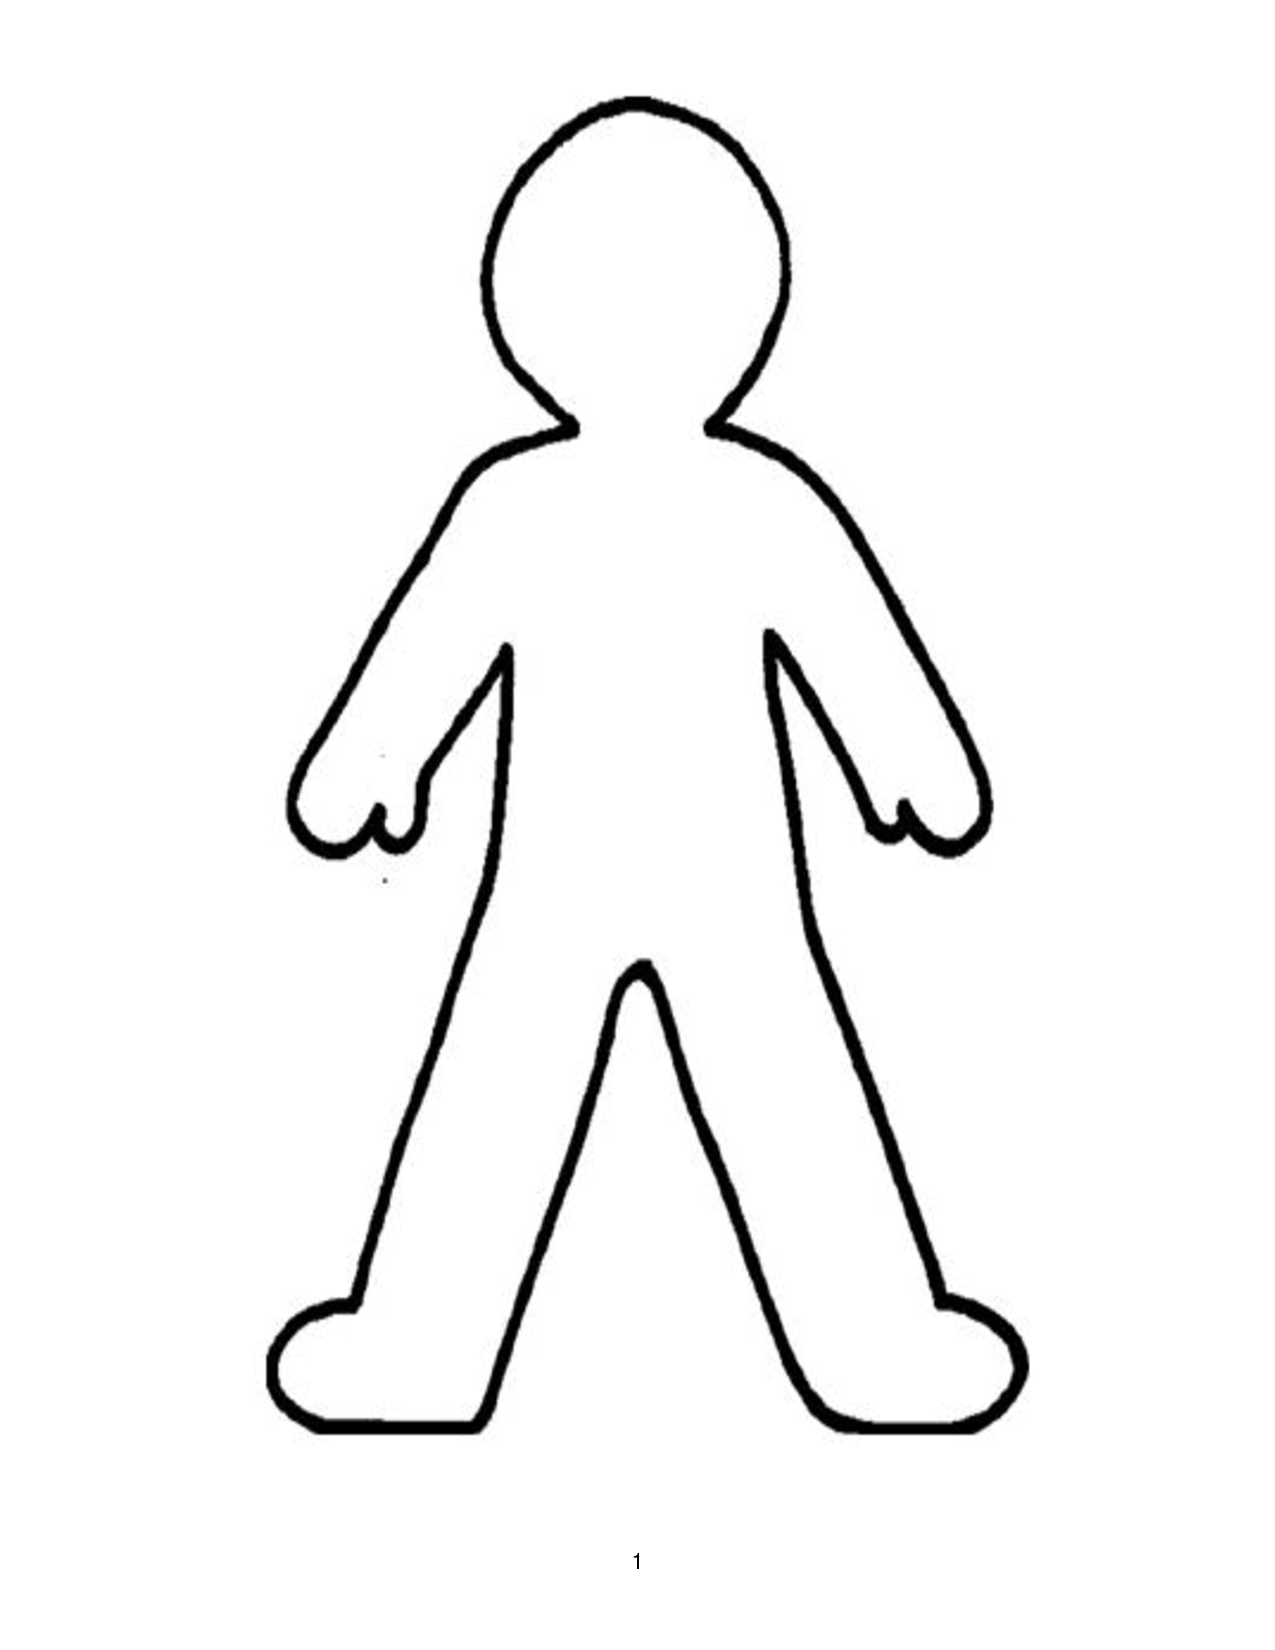 Free Blank Person Template, Download Free Blank Person Template png